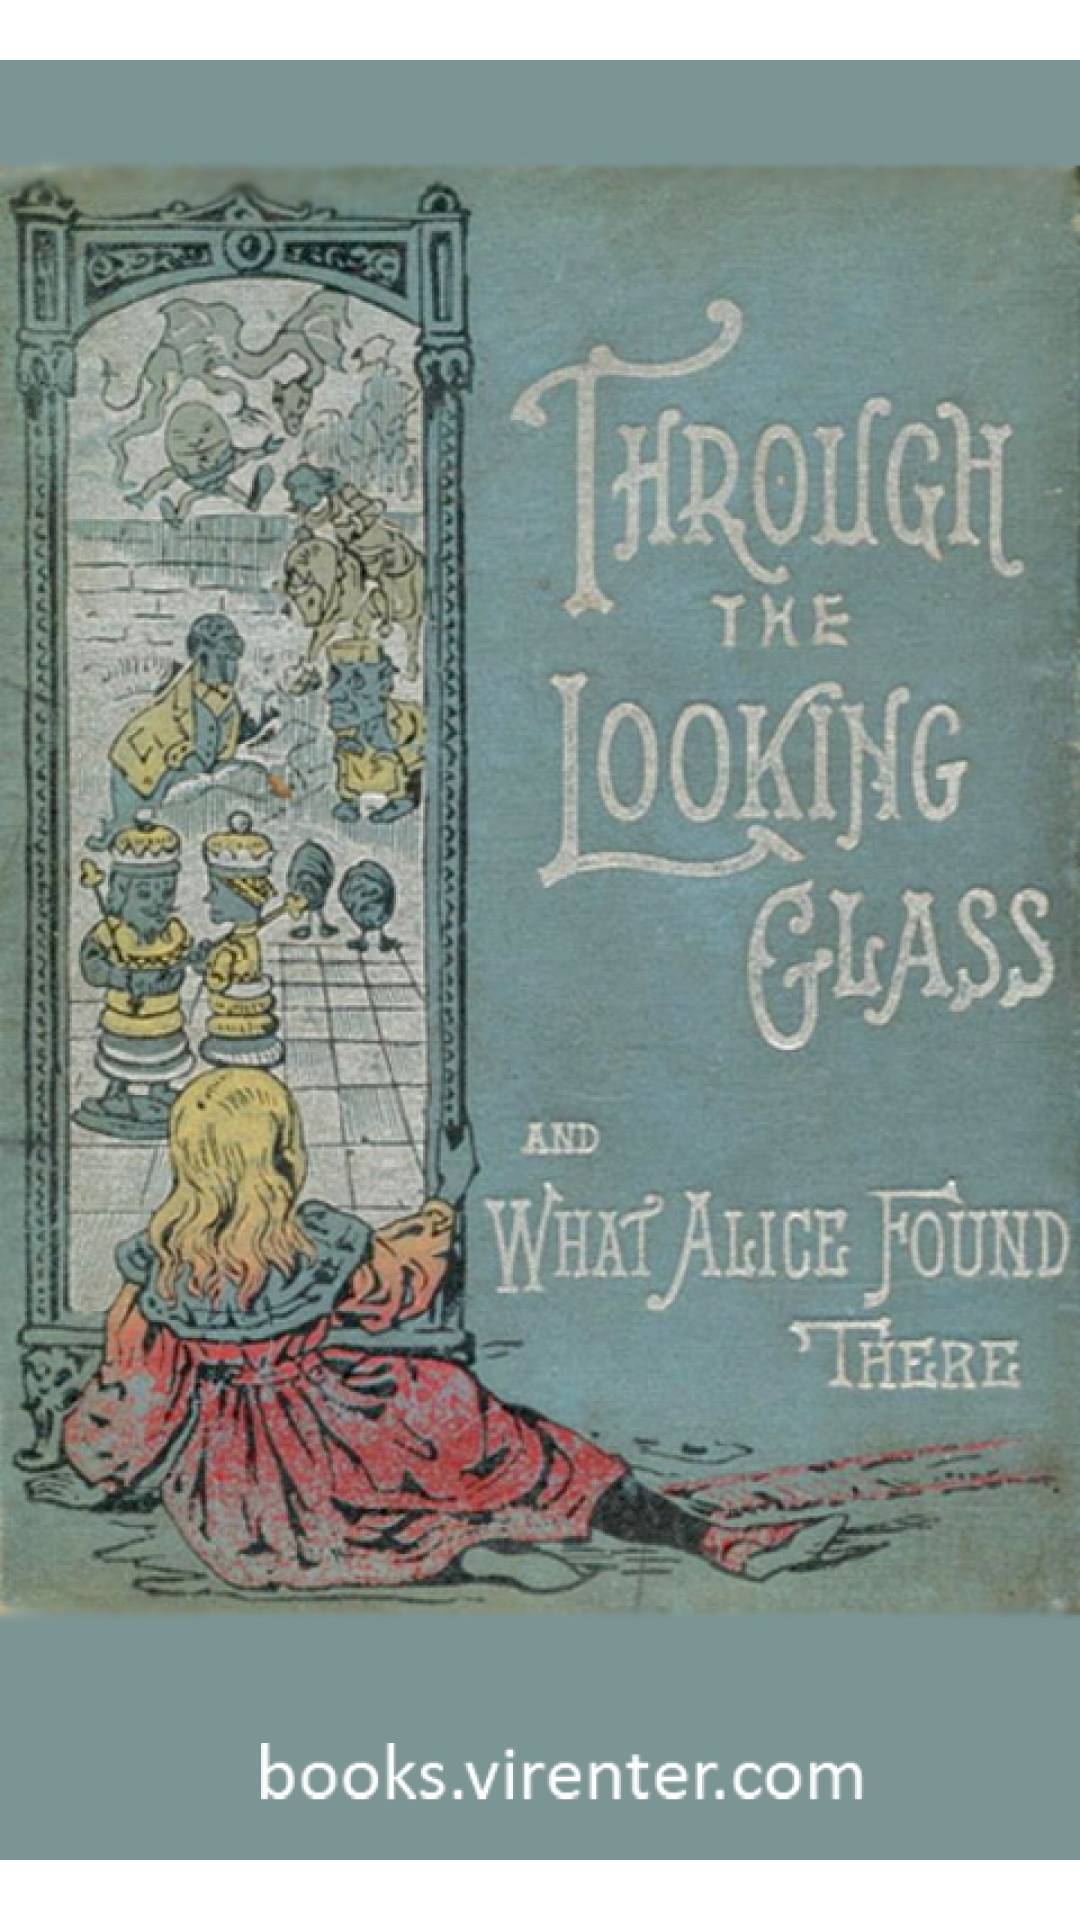 Lewis Carroll - Through the Looking-Glass, and What Alice Found There